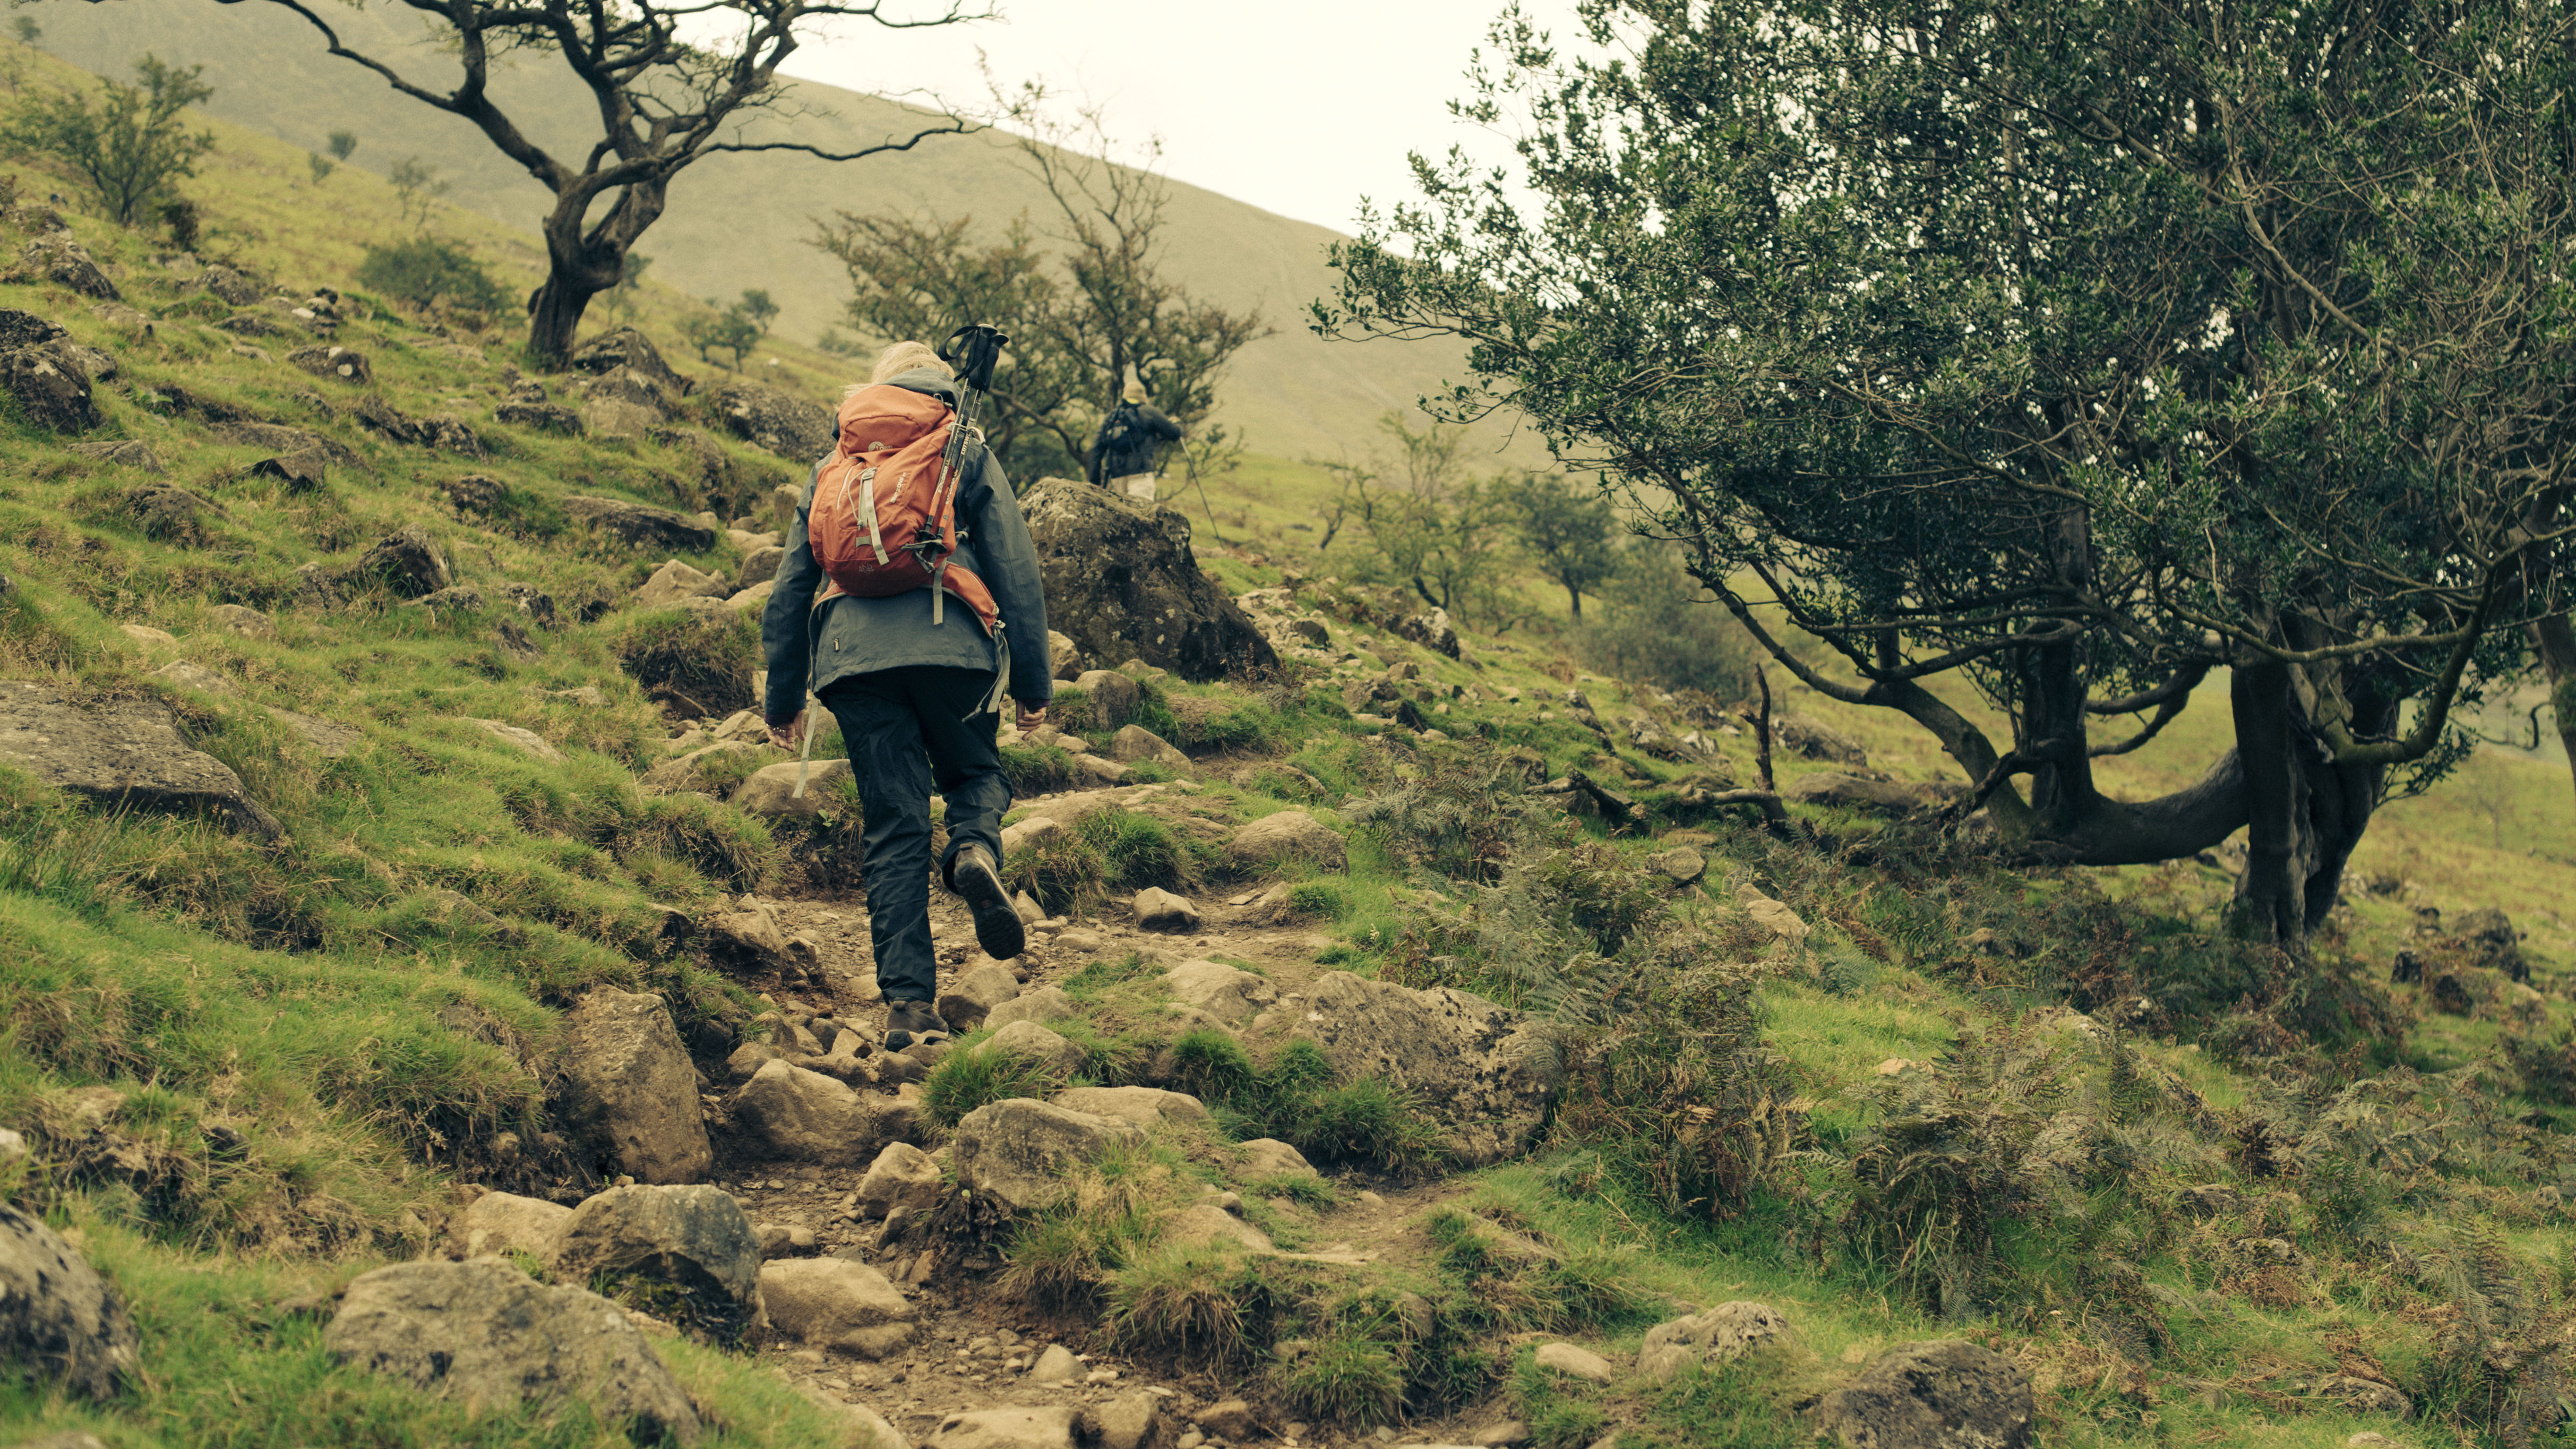 Image shows person hiking up uneven terrain